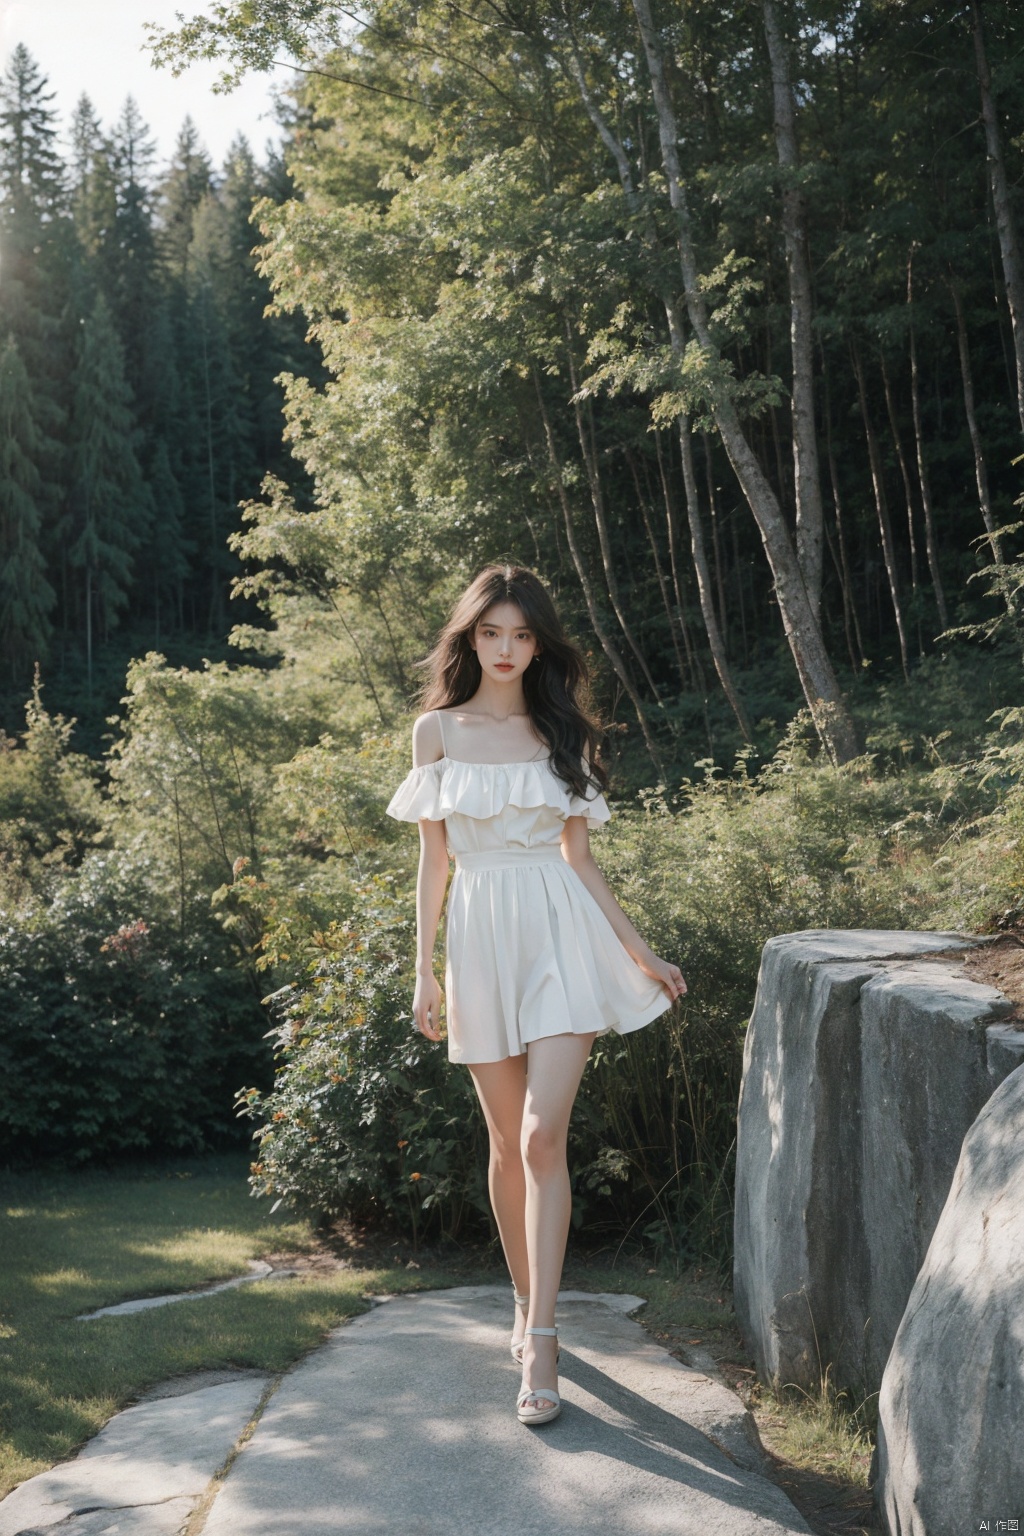  A girl, her hair flowing in the wind, stands on a rocky outcrop in the forest, the trees stretching out behind her. The scene is captured using a Fujifilm X-T3 with a 16-55mm f/2.8 lens, the image having a sharp and clear focus. The photograph has a sense of drama and tension, inspired by the works of Helmut Newton.